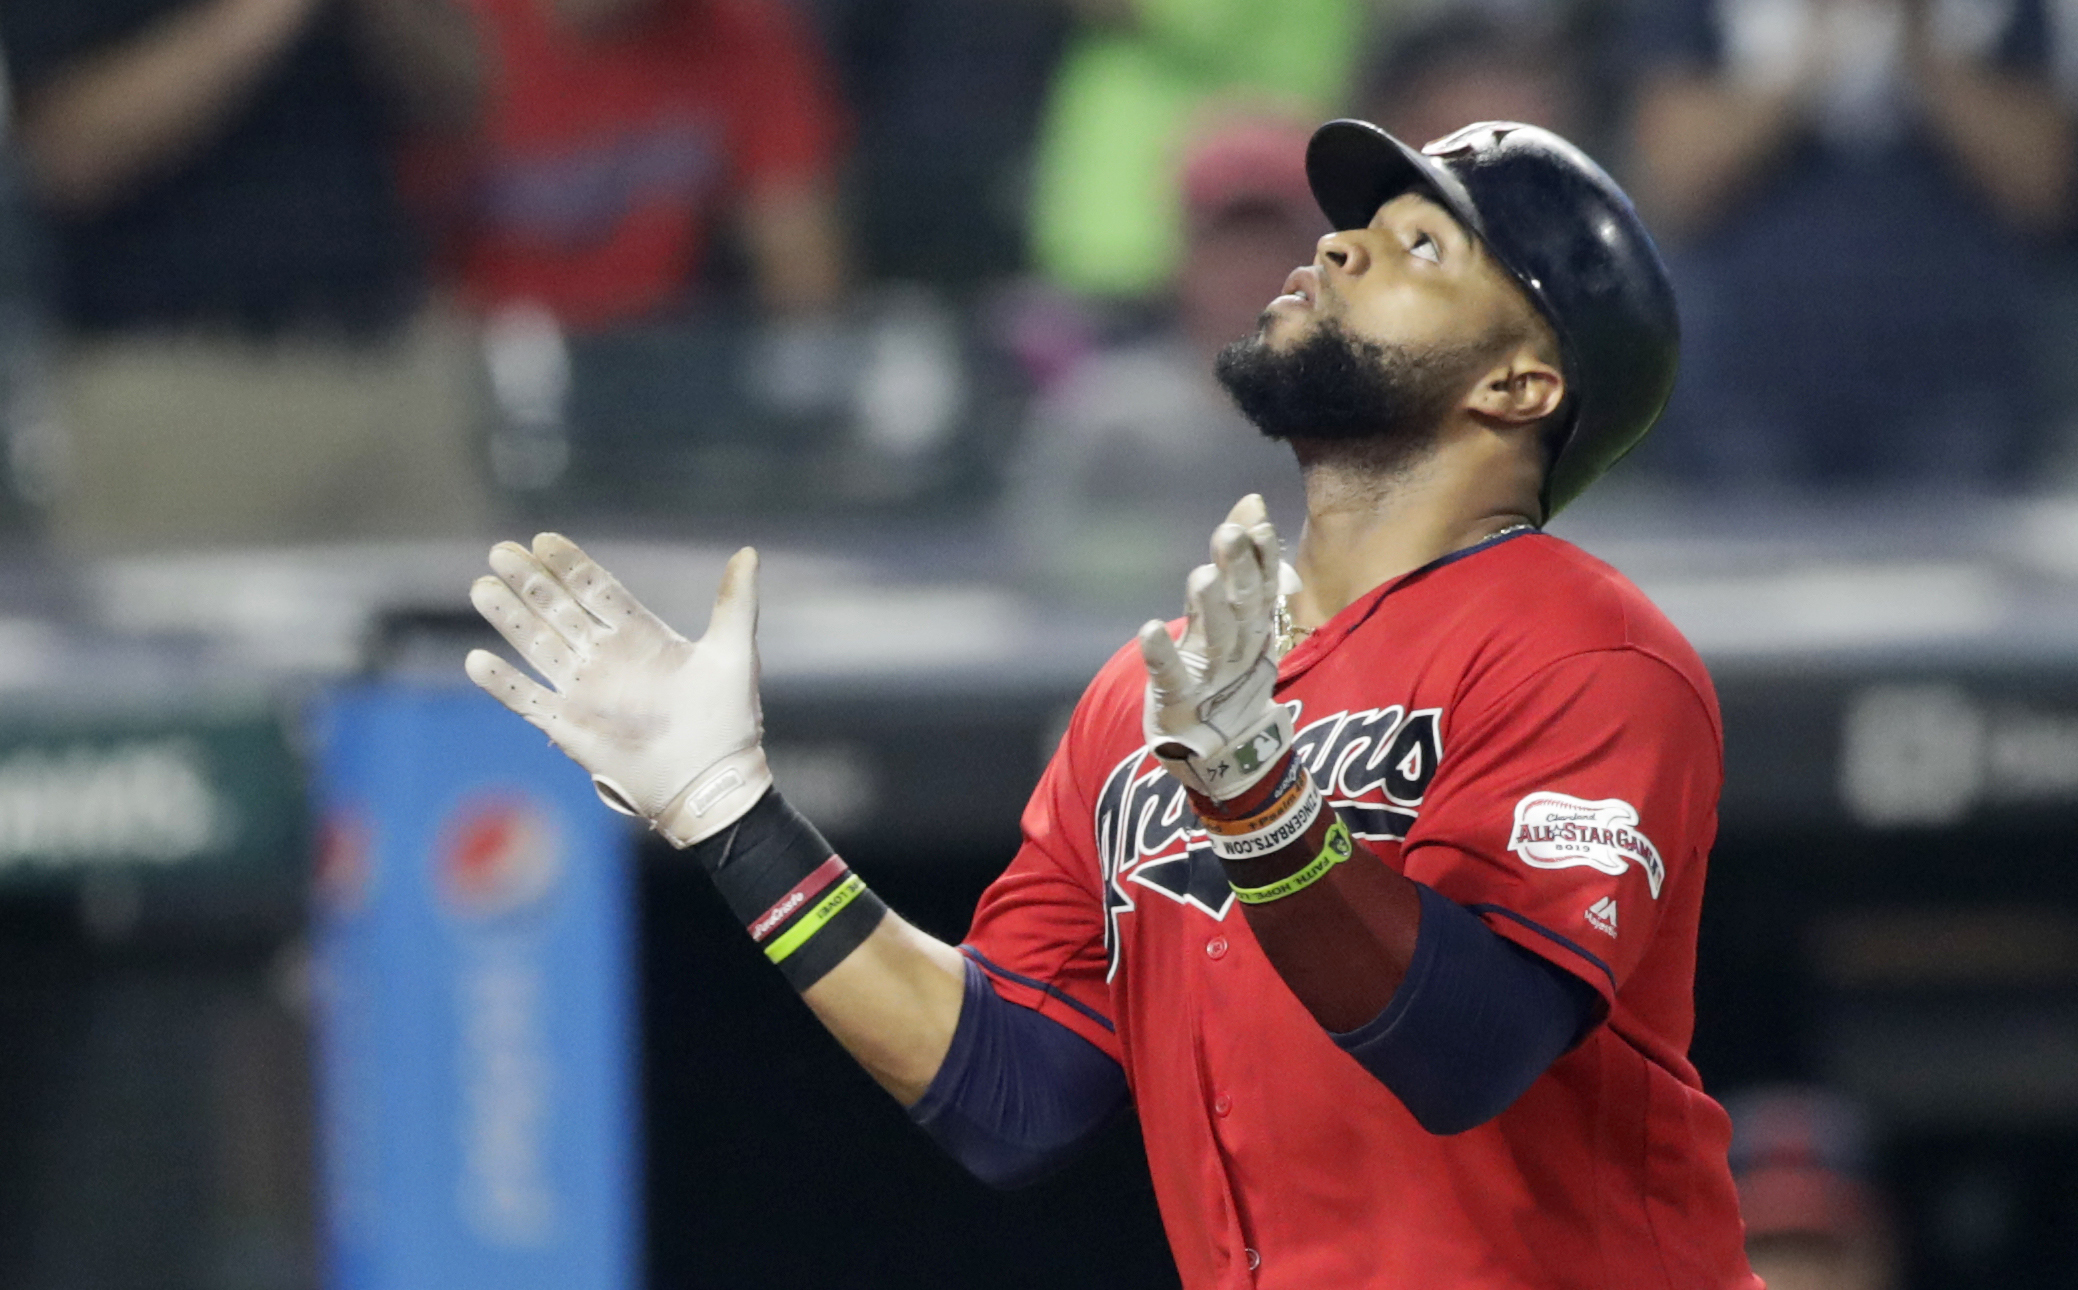 Indians first baseman Carlos Santana sends musical message to vote